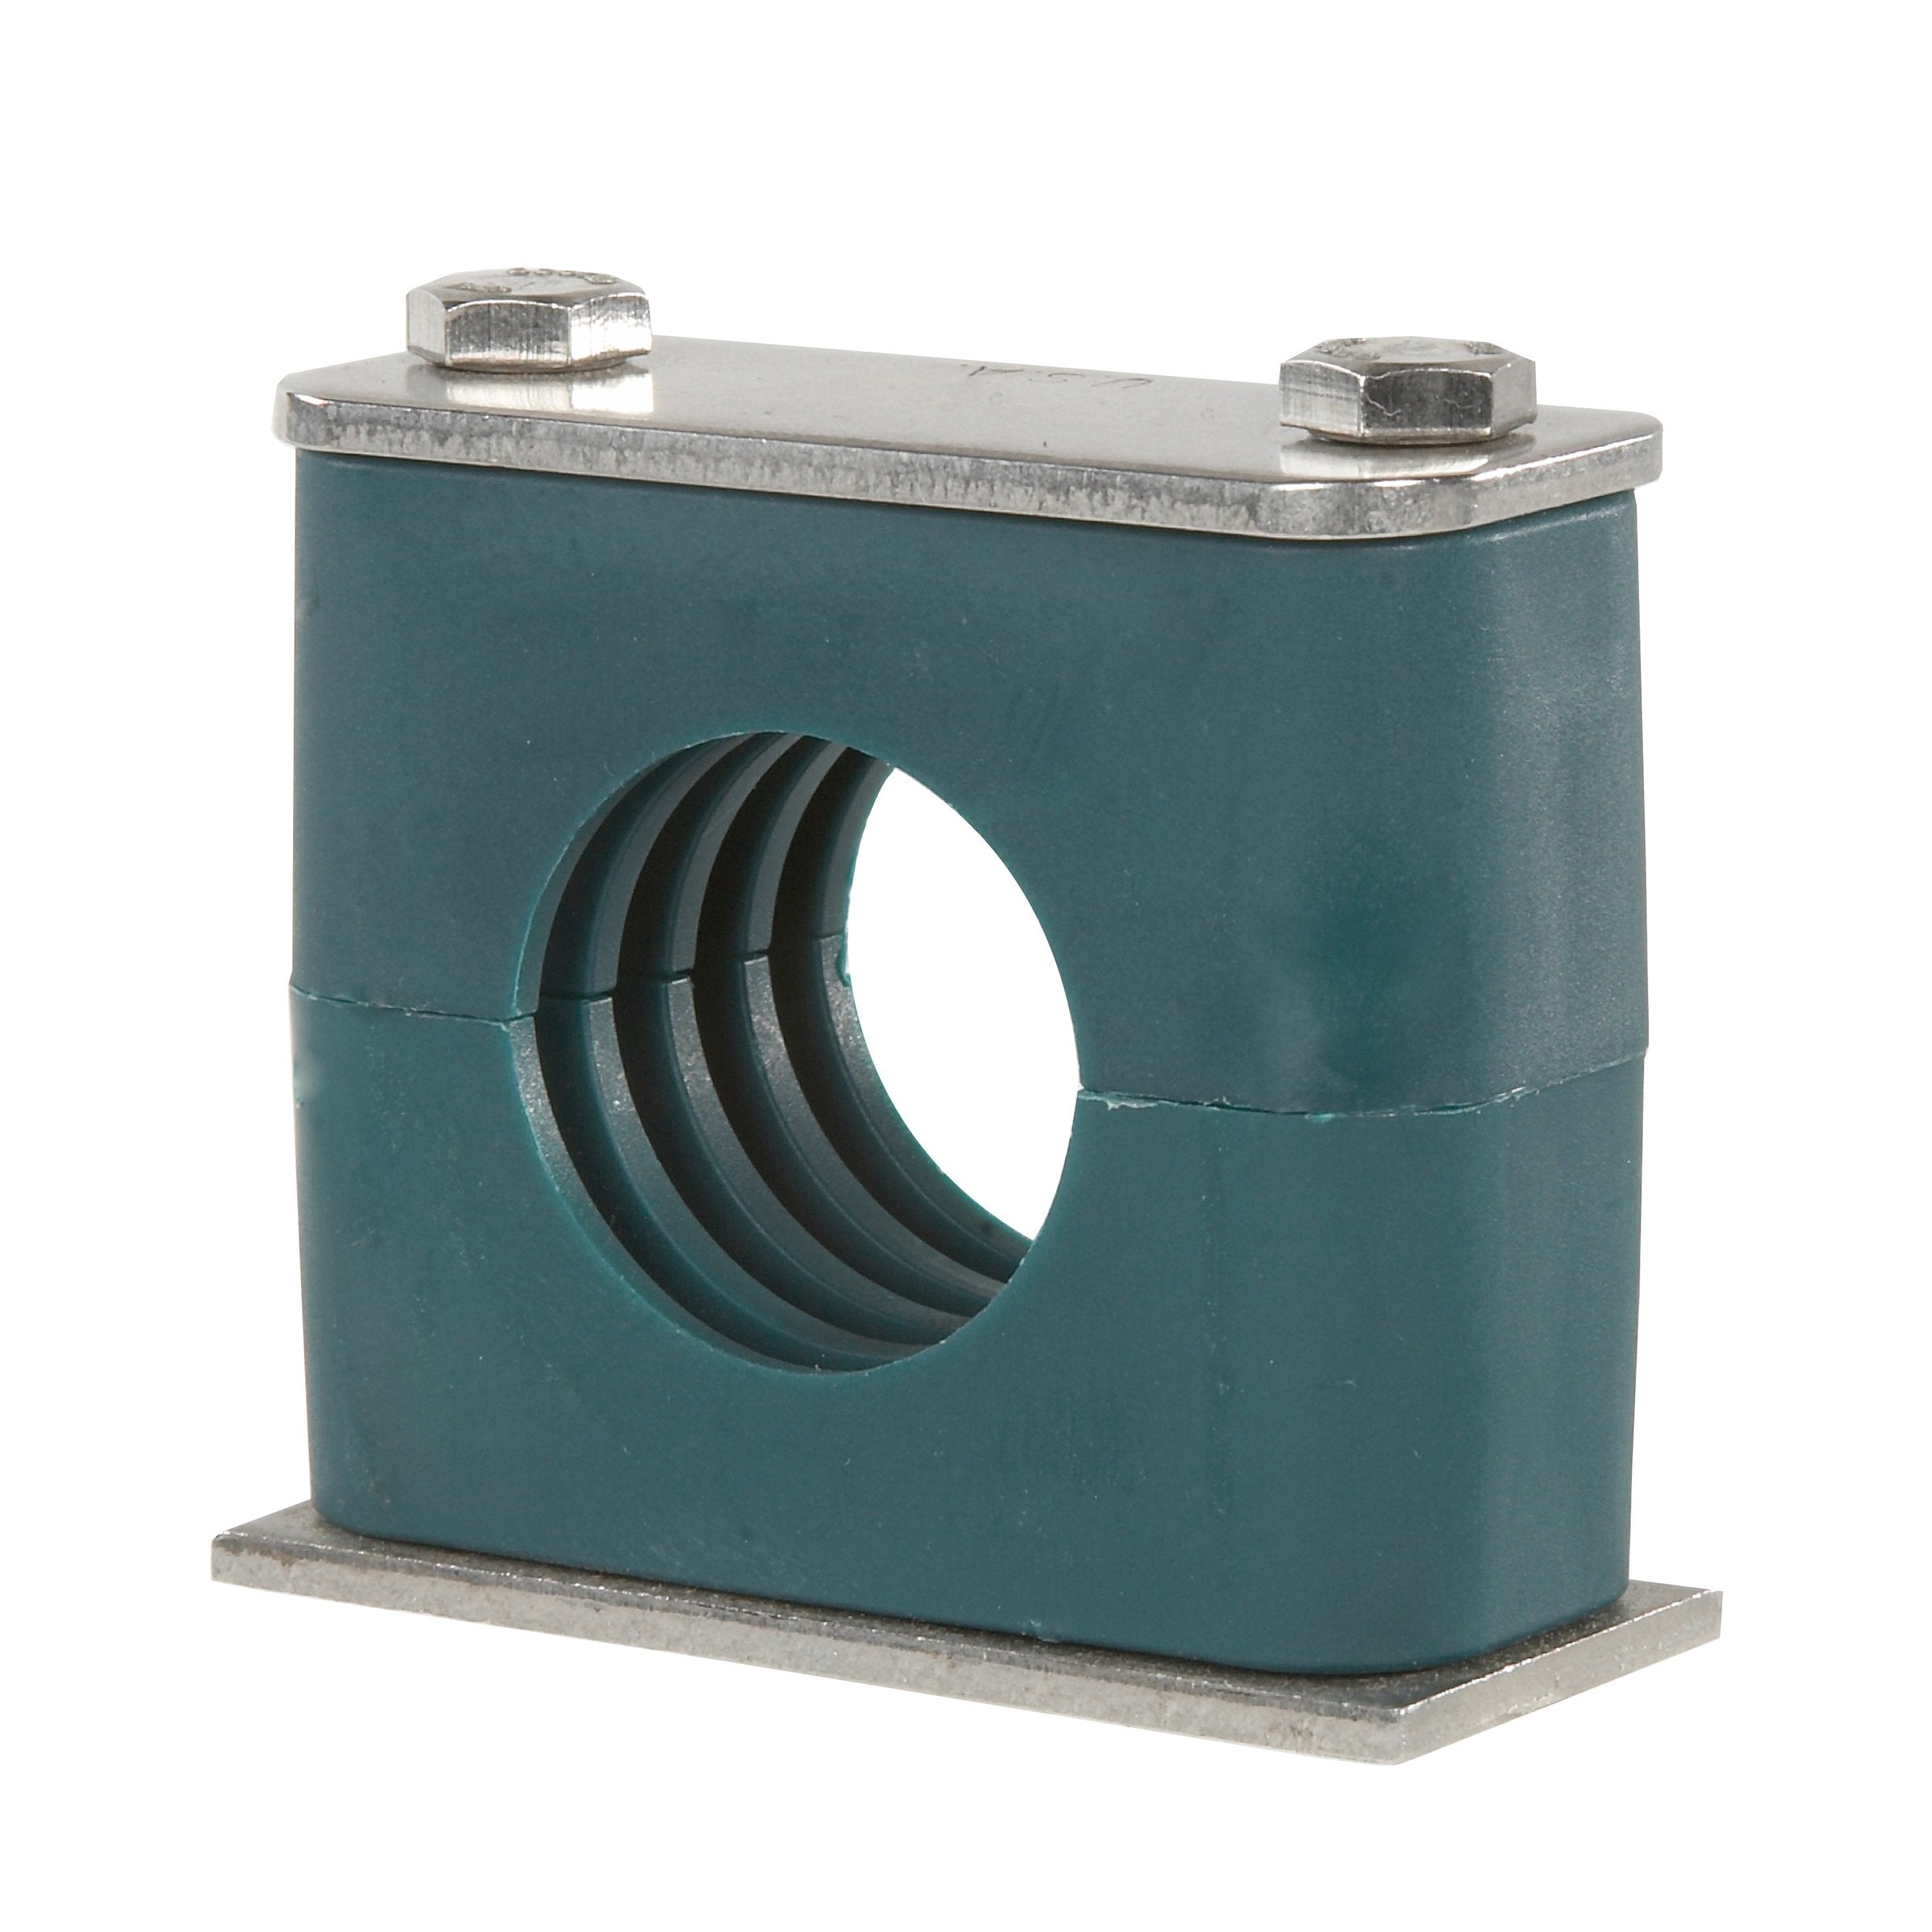 SP-760.3-PP-DP-AS-U-W5 : Stauff Clamp, Single Weld Plate, 2.37" (60.3mm) OD, for 2" Pipe, Green PP Insert, Profiled Interior, 316SS